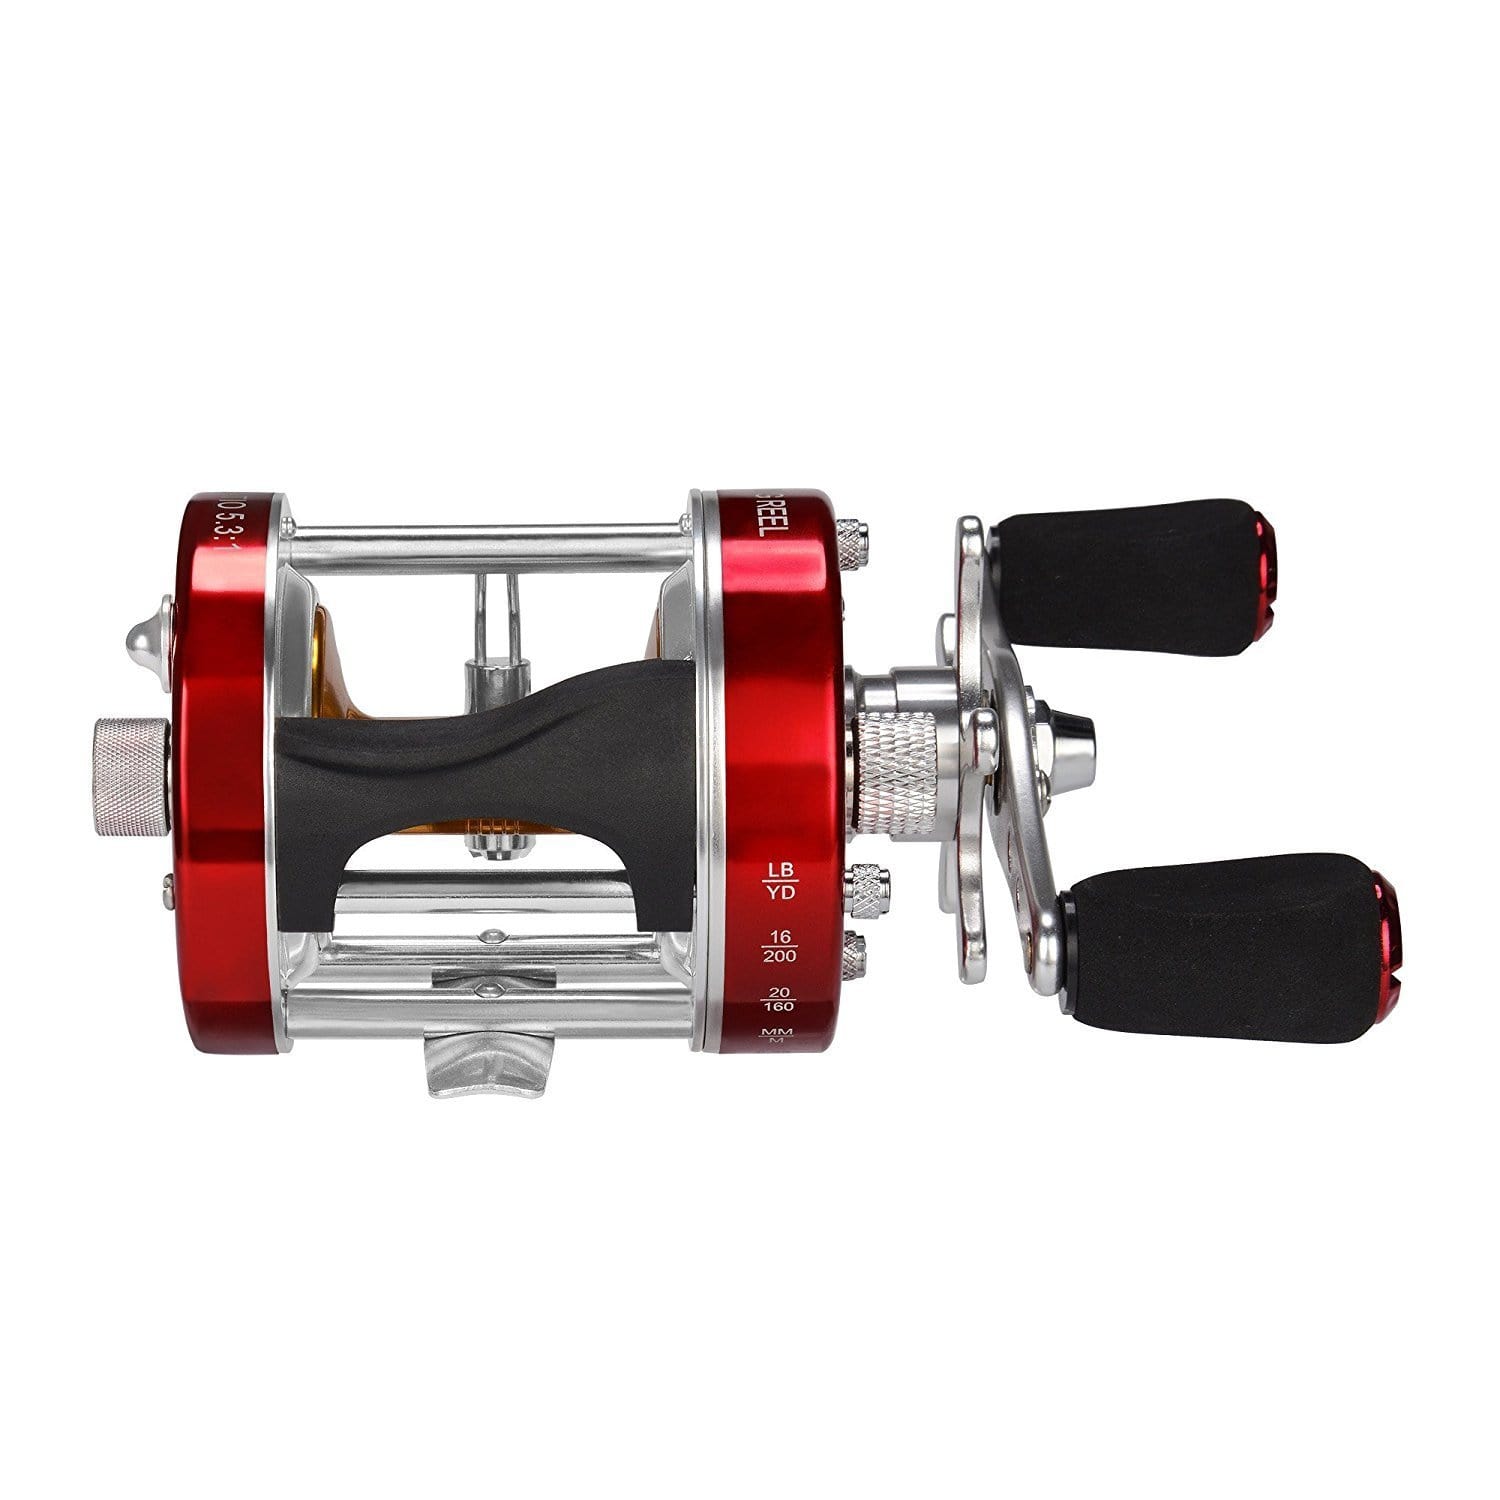 KastKing Rover Round Baitcasting Reel, Right Handed Fishing Reel,Rover40